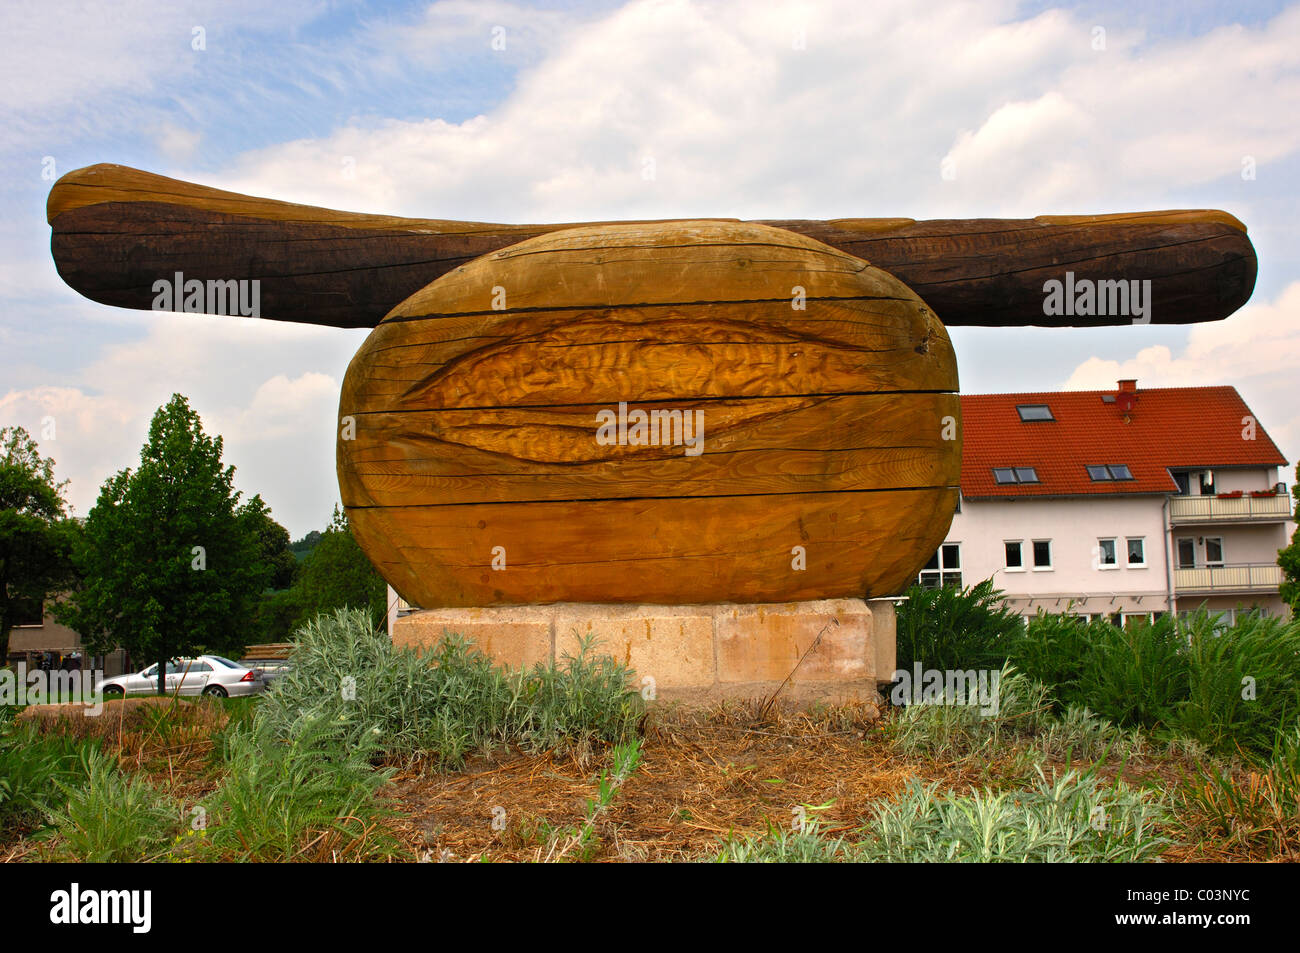 Wooden sculpture of a fried sausage, or Thuringian sausage, Holzhausen, Thuringia, Germany Stock Photo